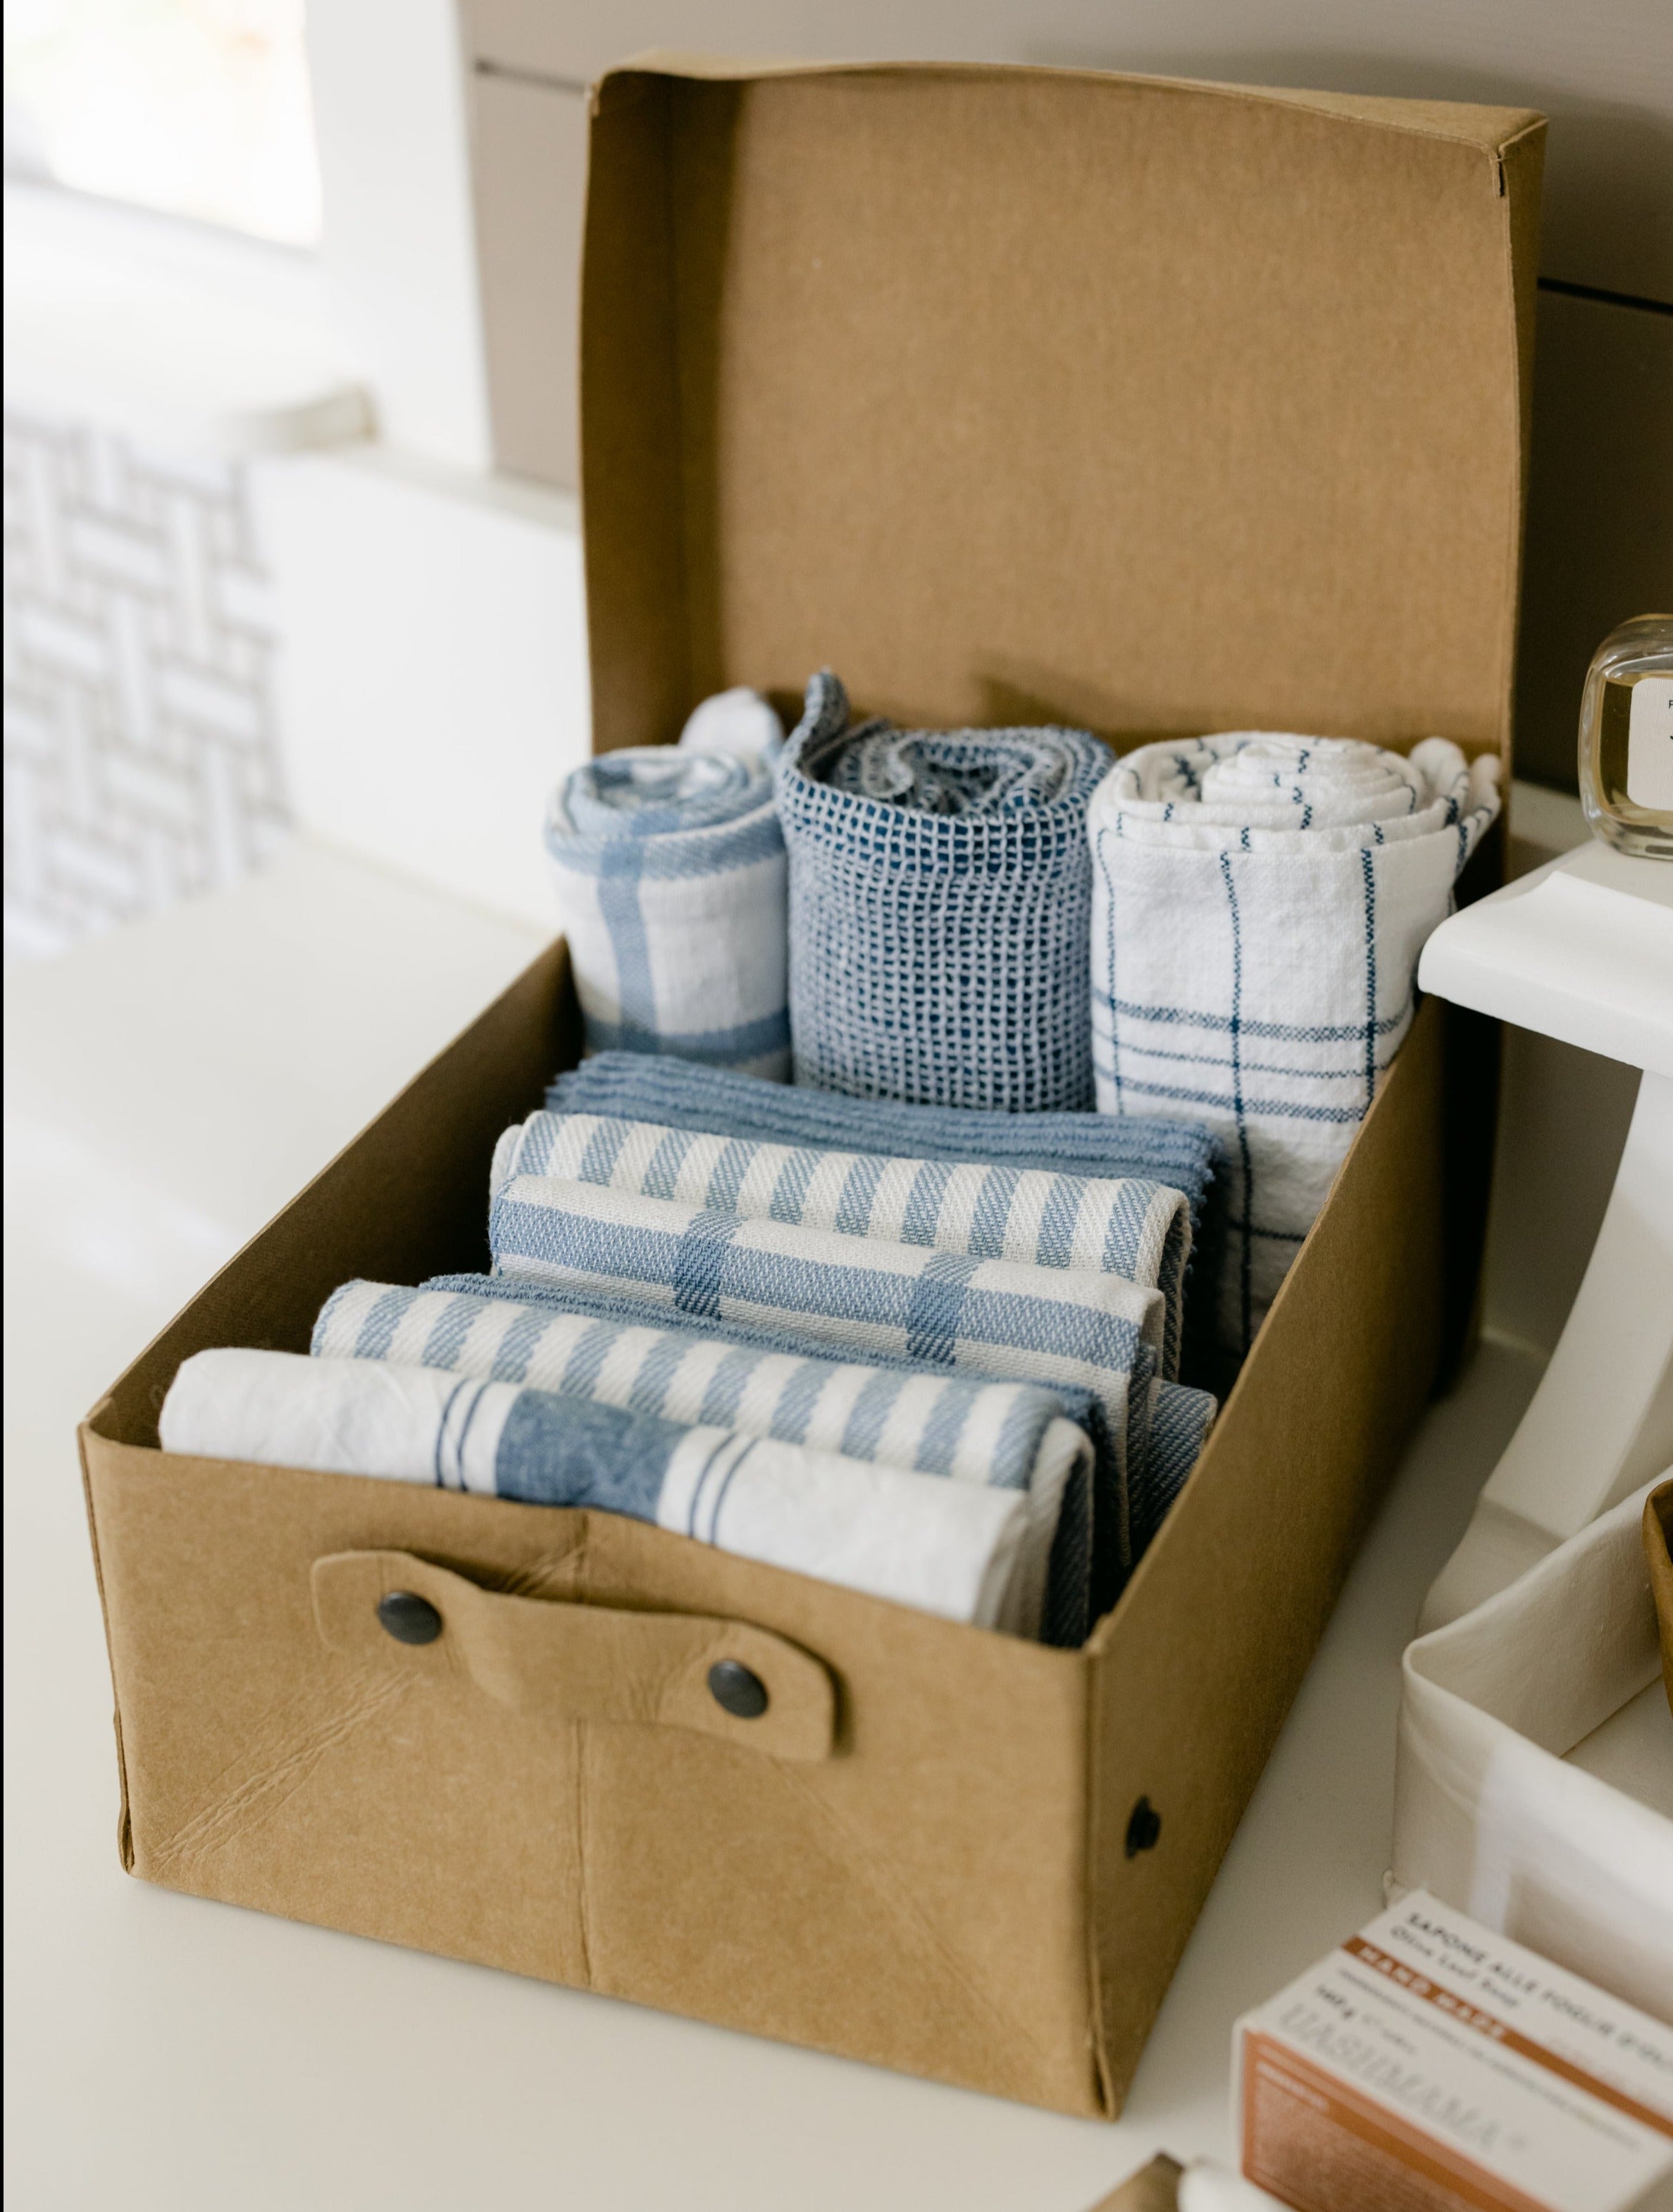 EASY BOX STORAGE CONTAINERS